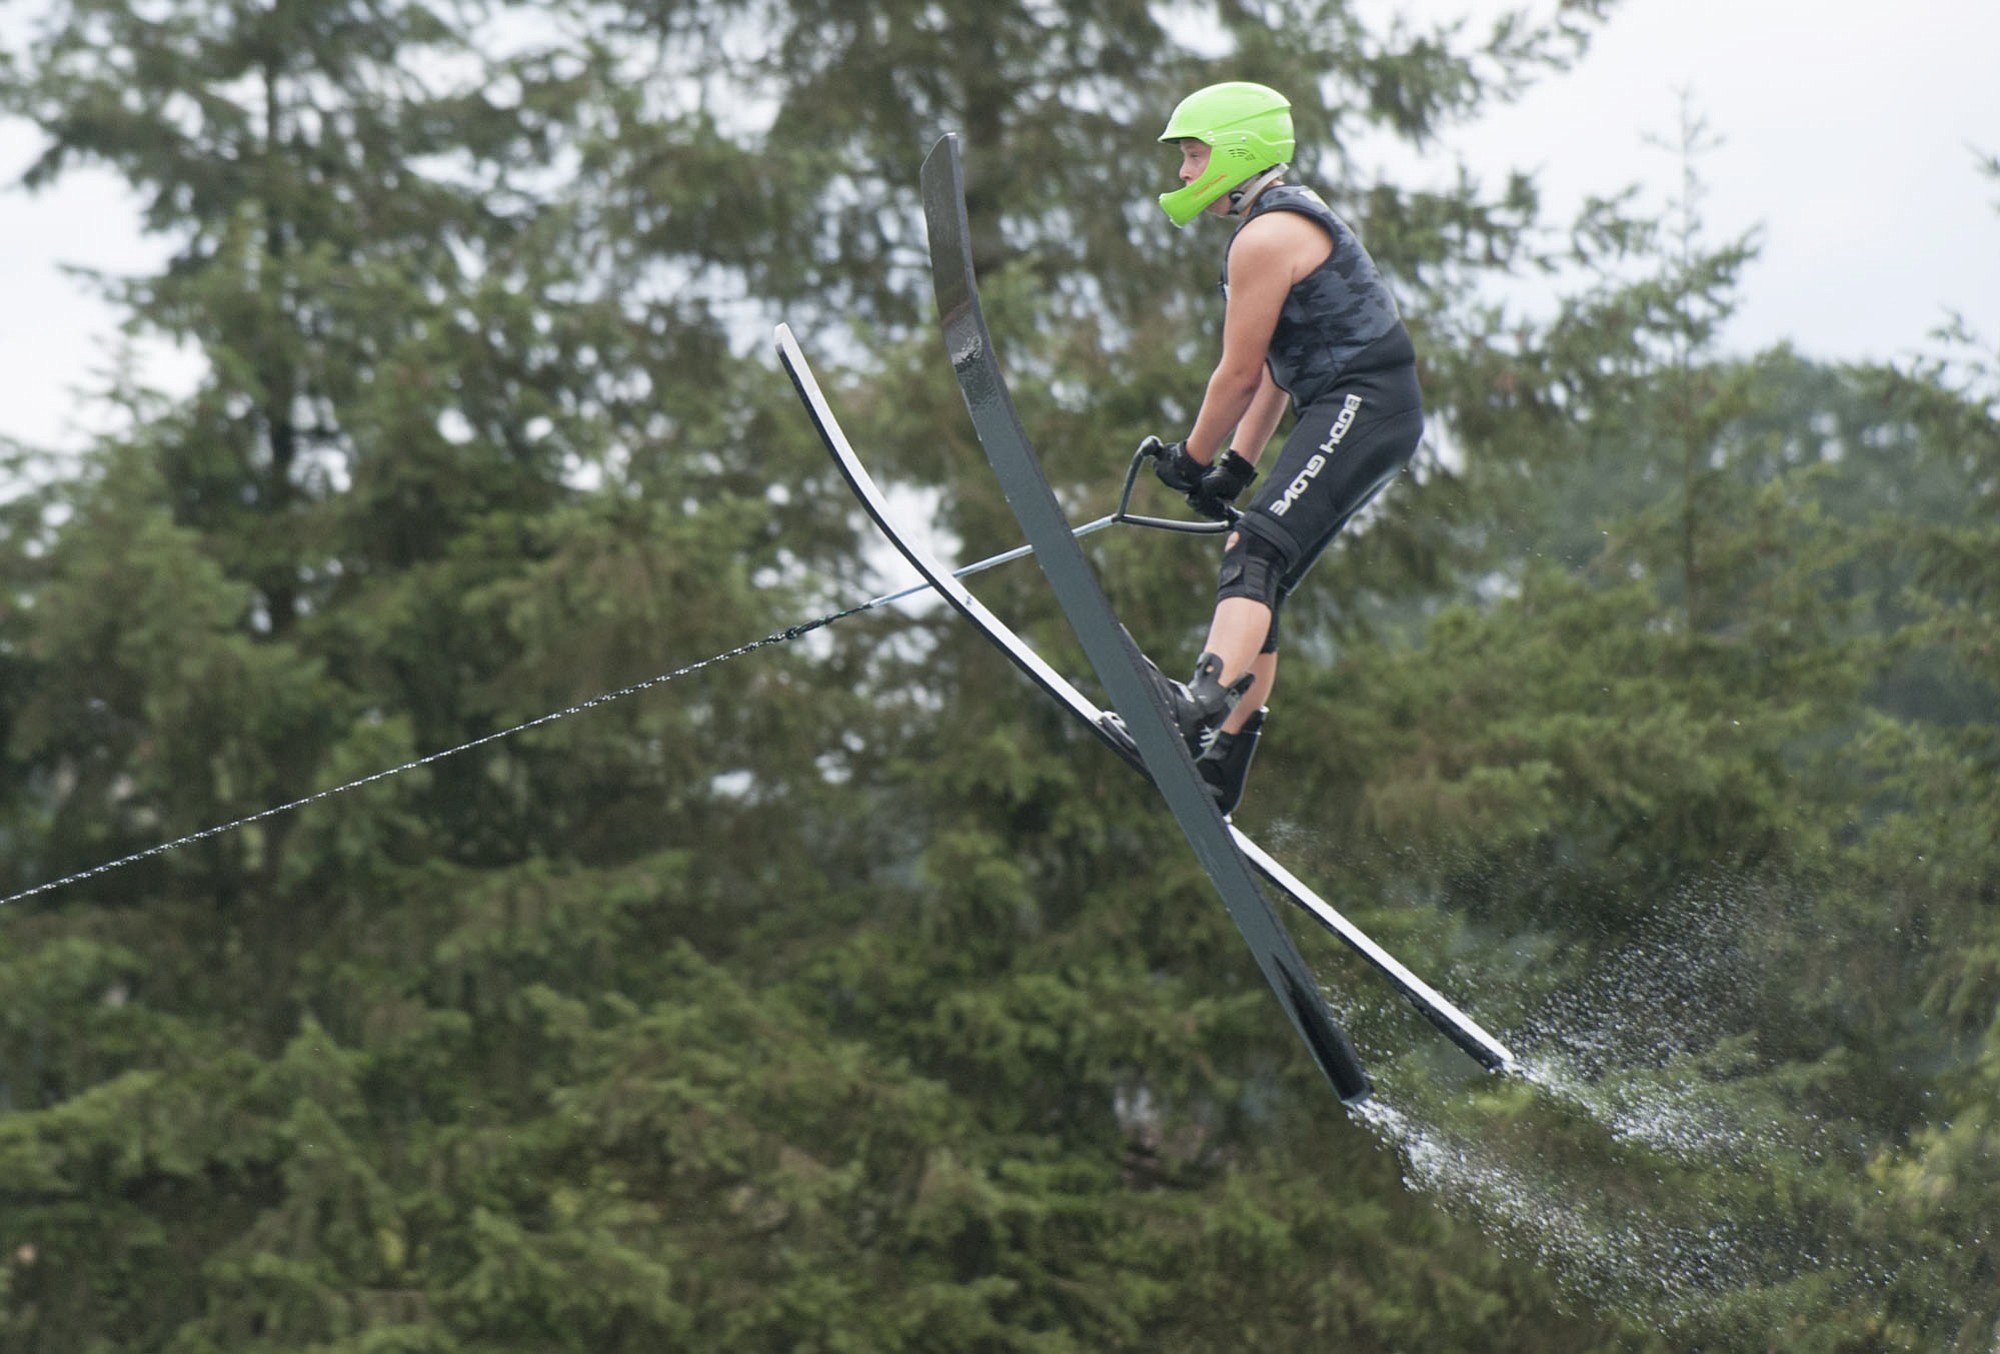 Alex Gaharan from California competes at the 2015 Western Regional Waterski Championships.